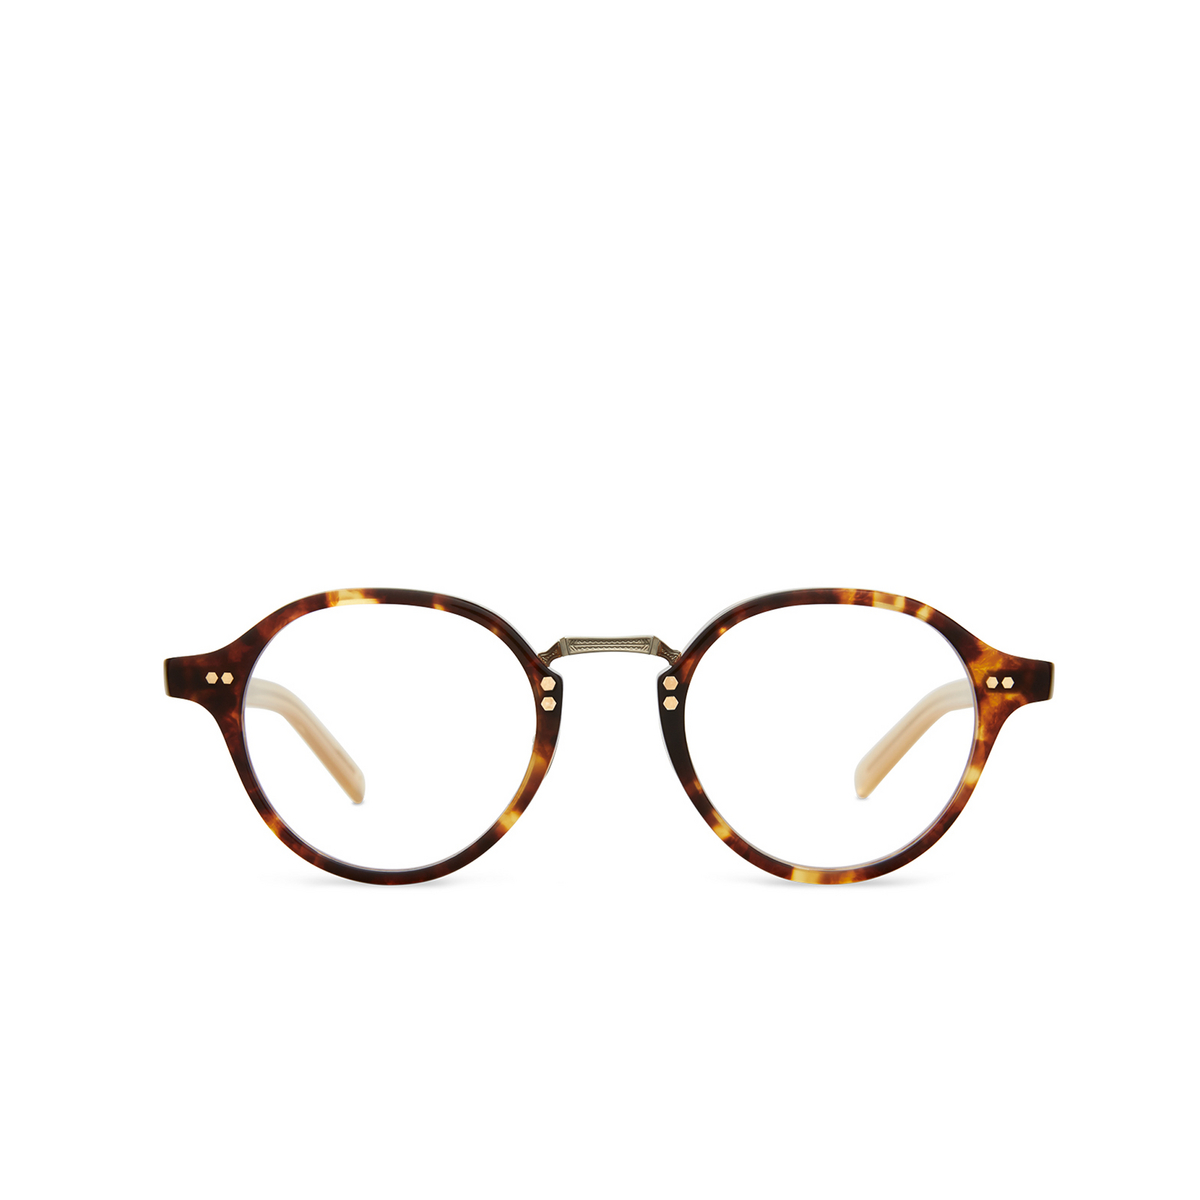 Mr. Leight SPIKE C Eyeglasses MPL-12KG-SMT Maple-12K White Gold-Summit - front view